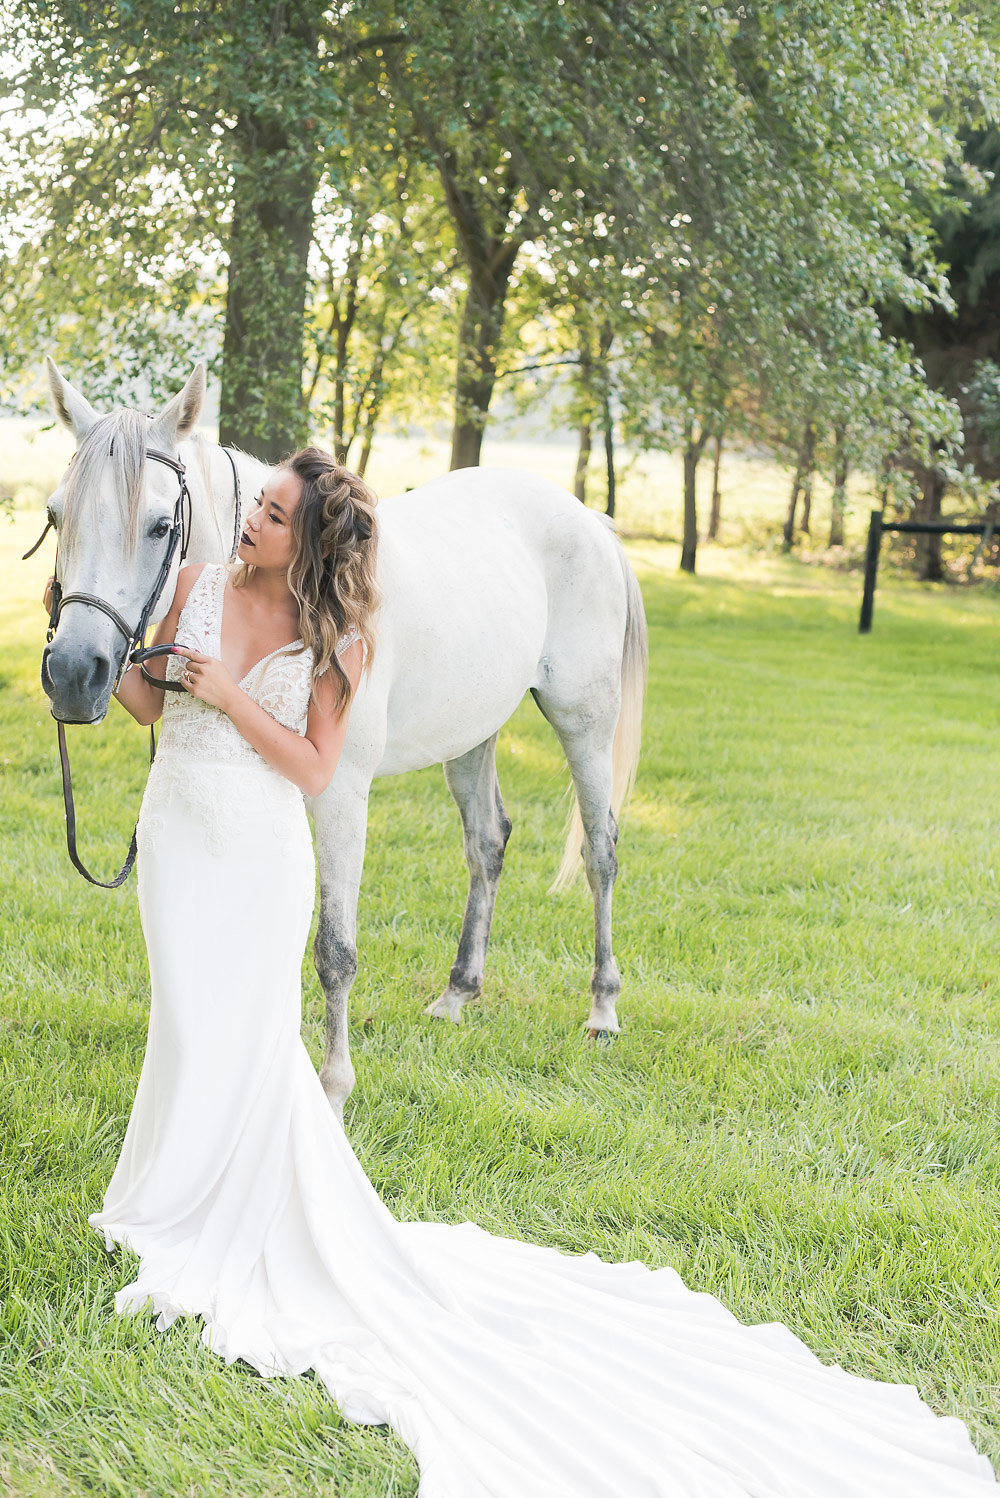 Wedding photographer capture of a woman in a white dress standing next to a white horse